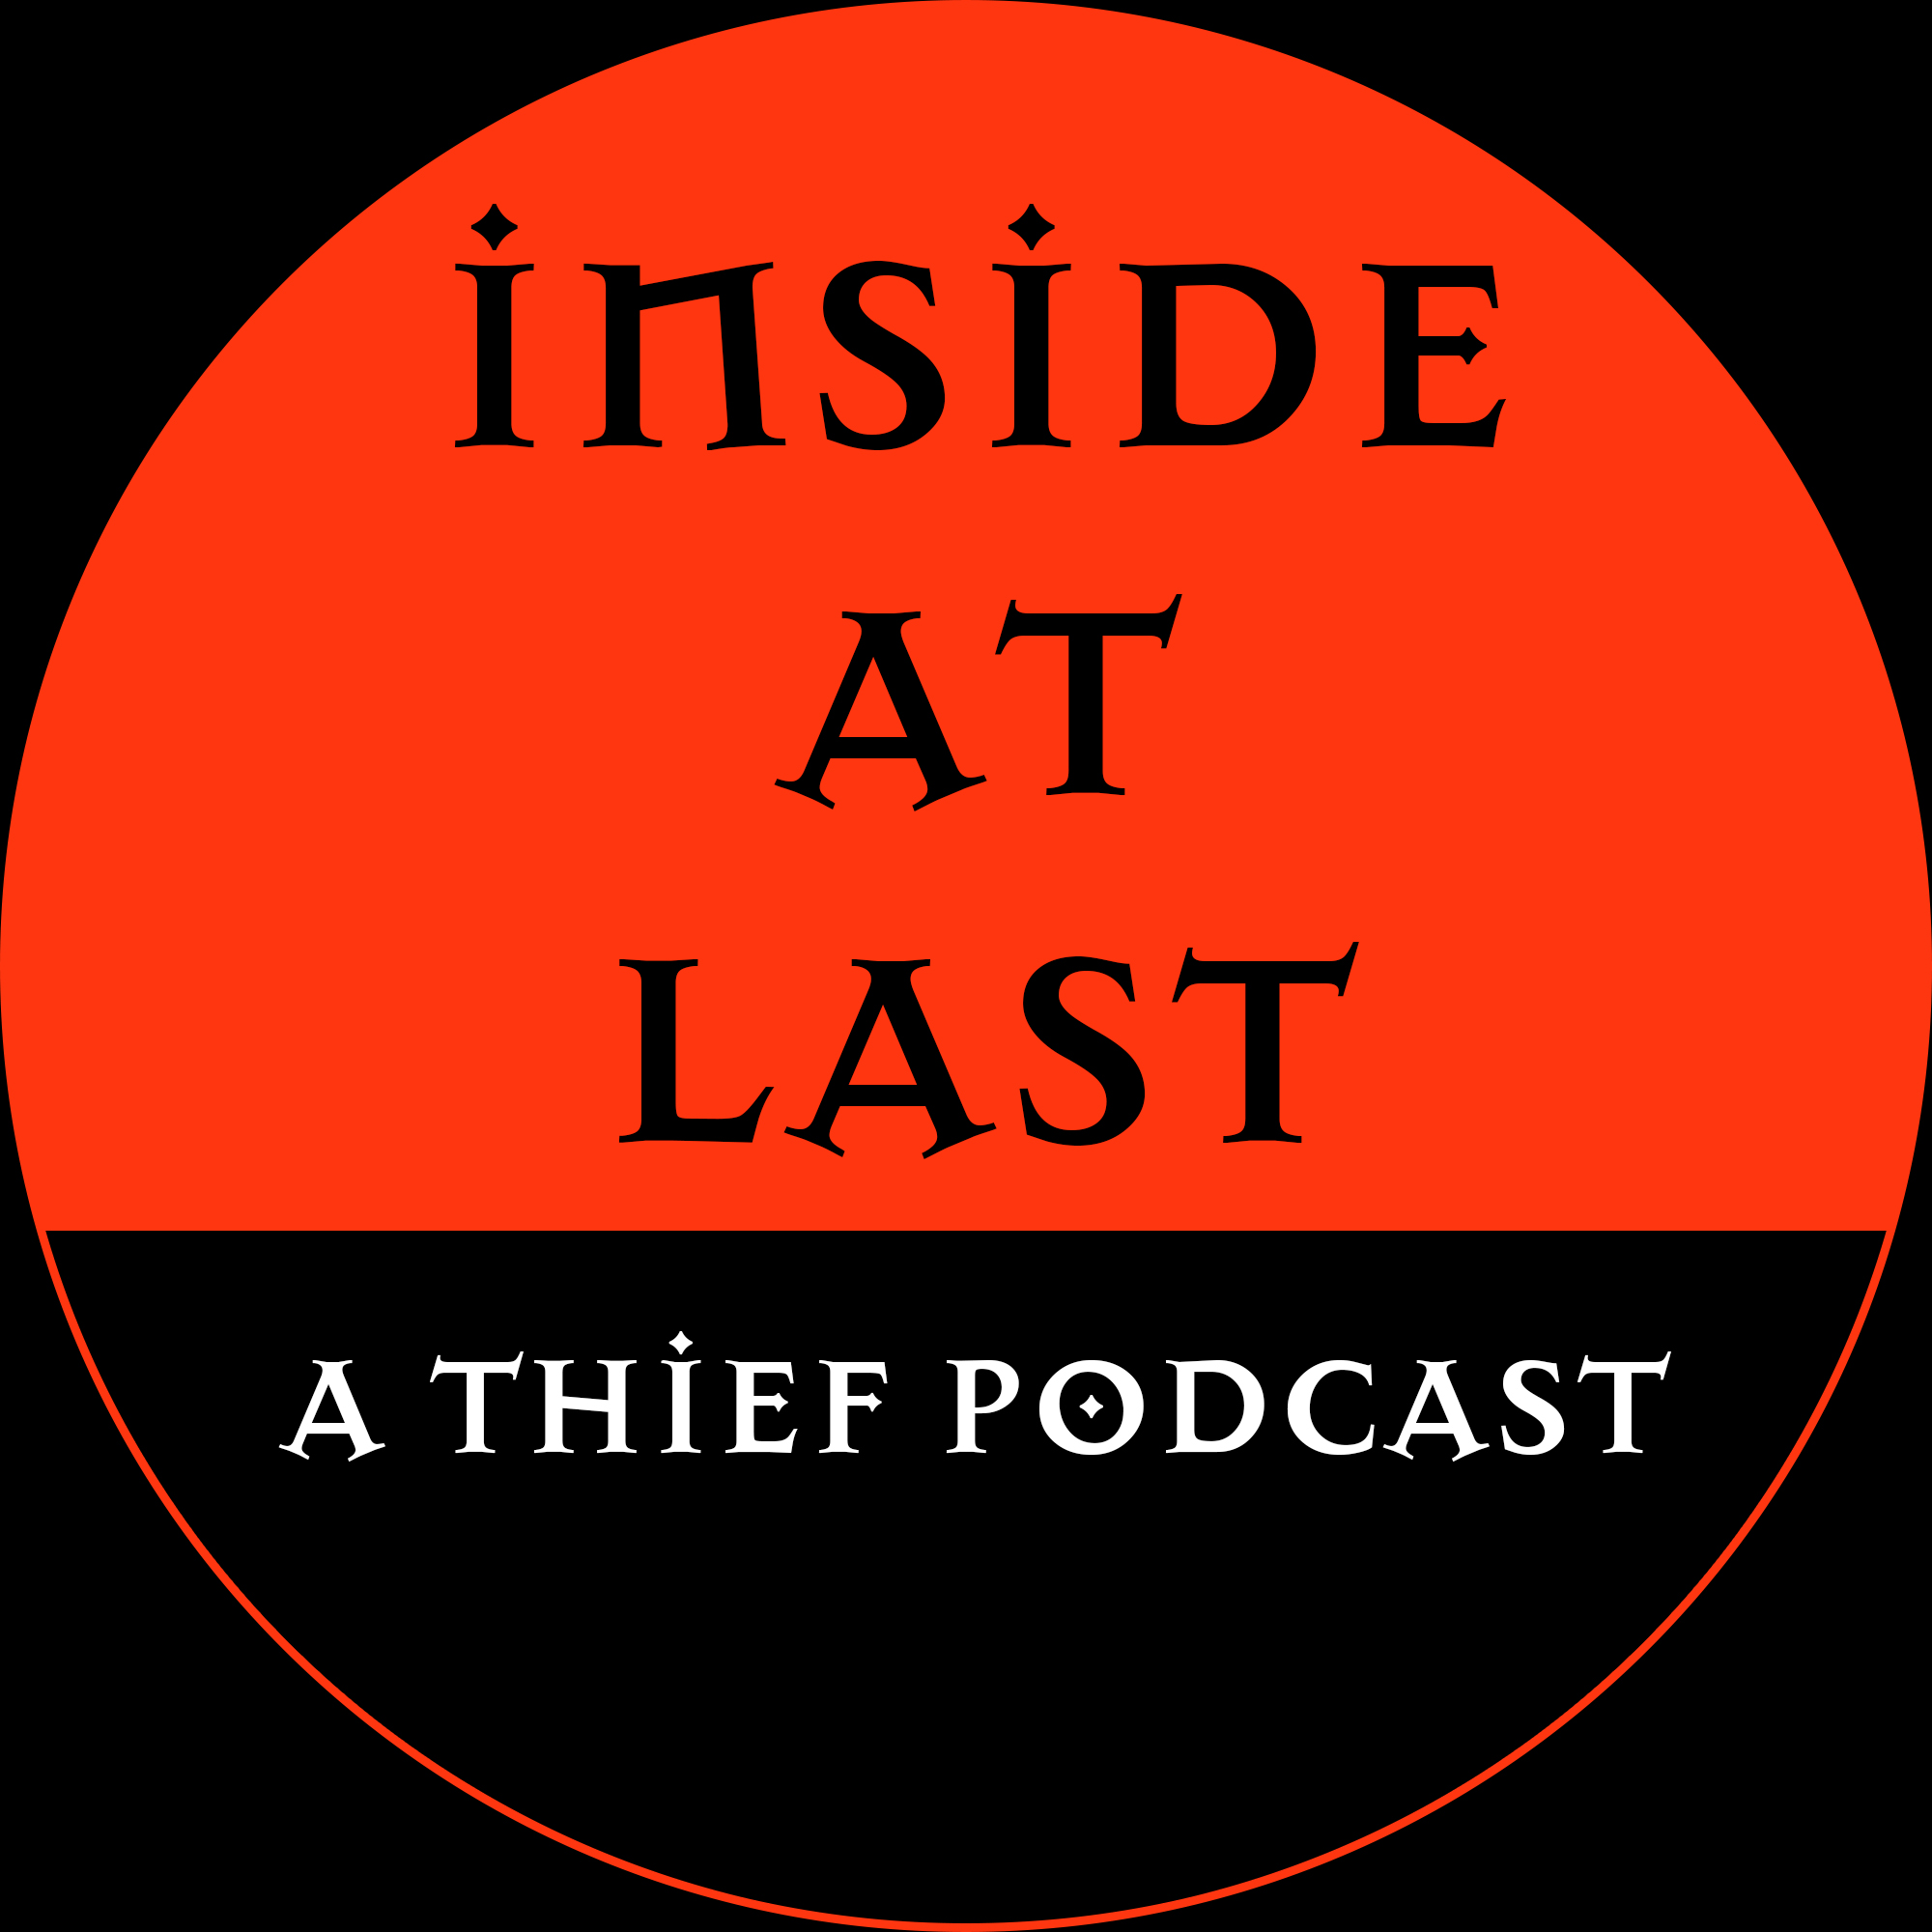 Thief Podcast - Inside at Last